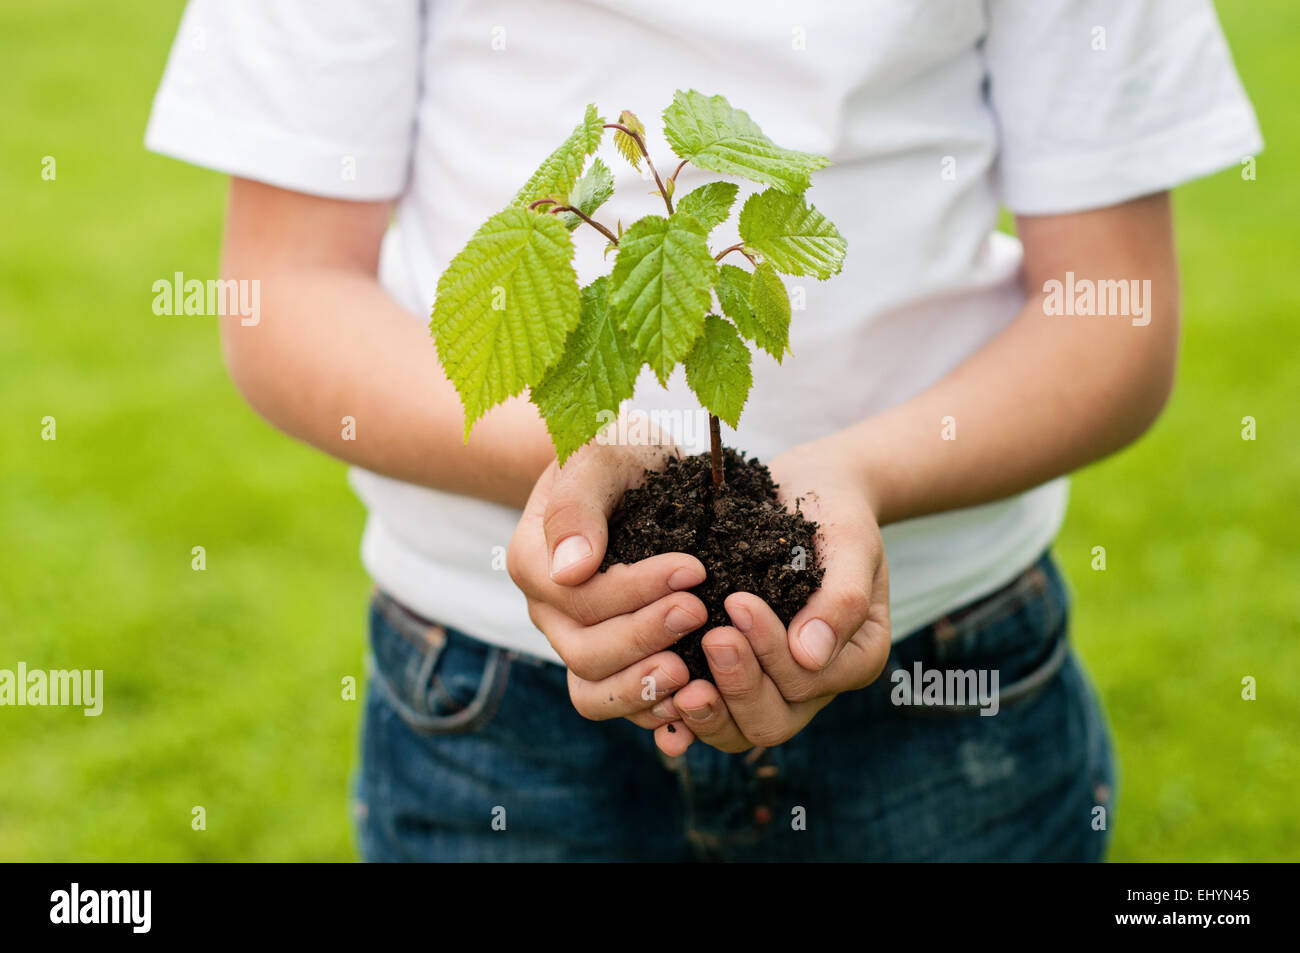 Boy holding a tree sapling in the palm of his hands Stock Photo